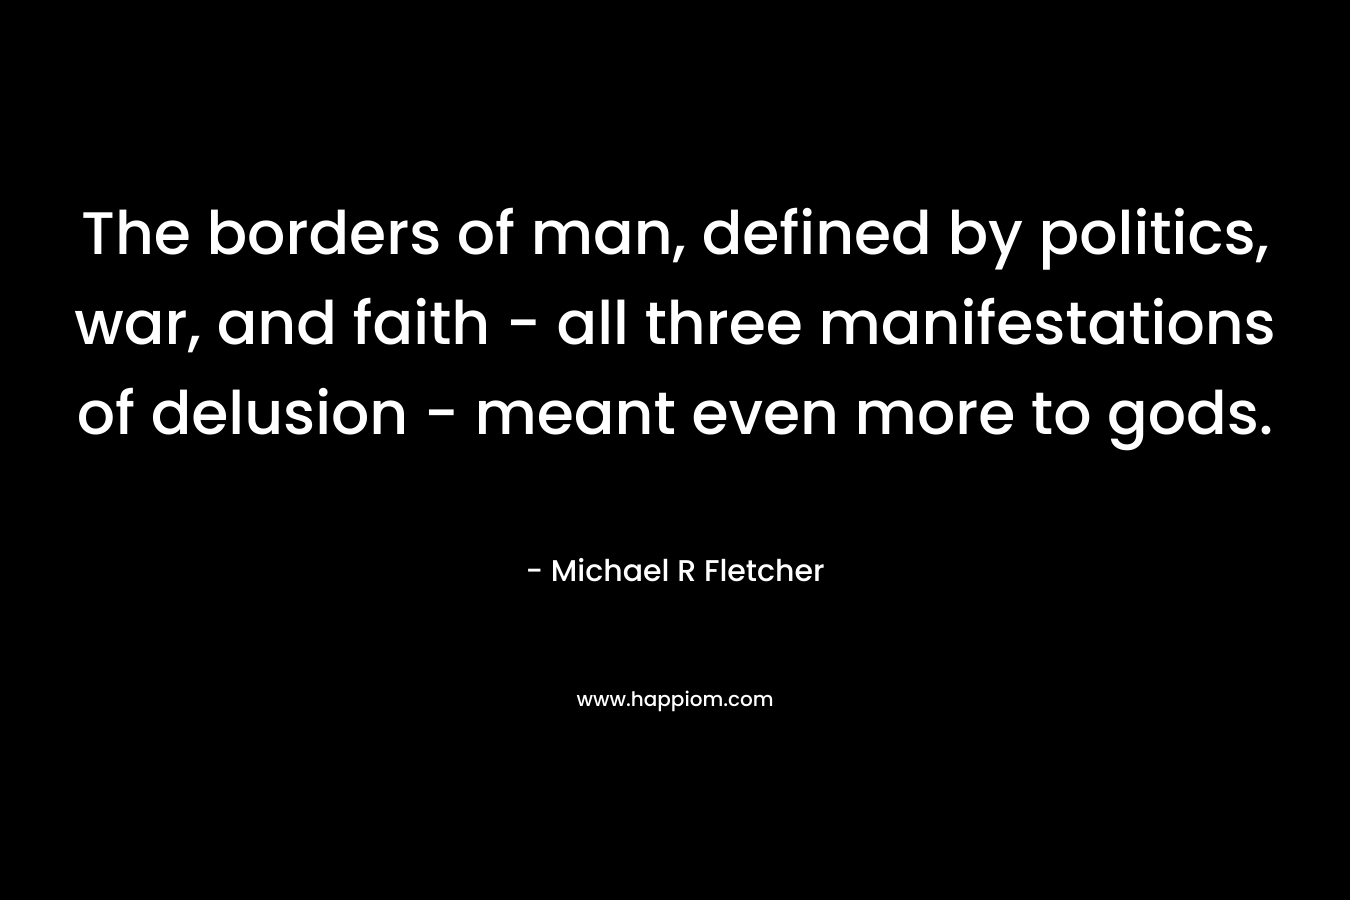 The borders of man, defined by politics, war, and faith – all three manifestations of delusion – meant even more to gods. – Michael R Fletcher